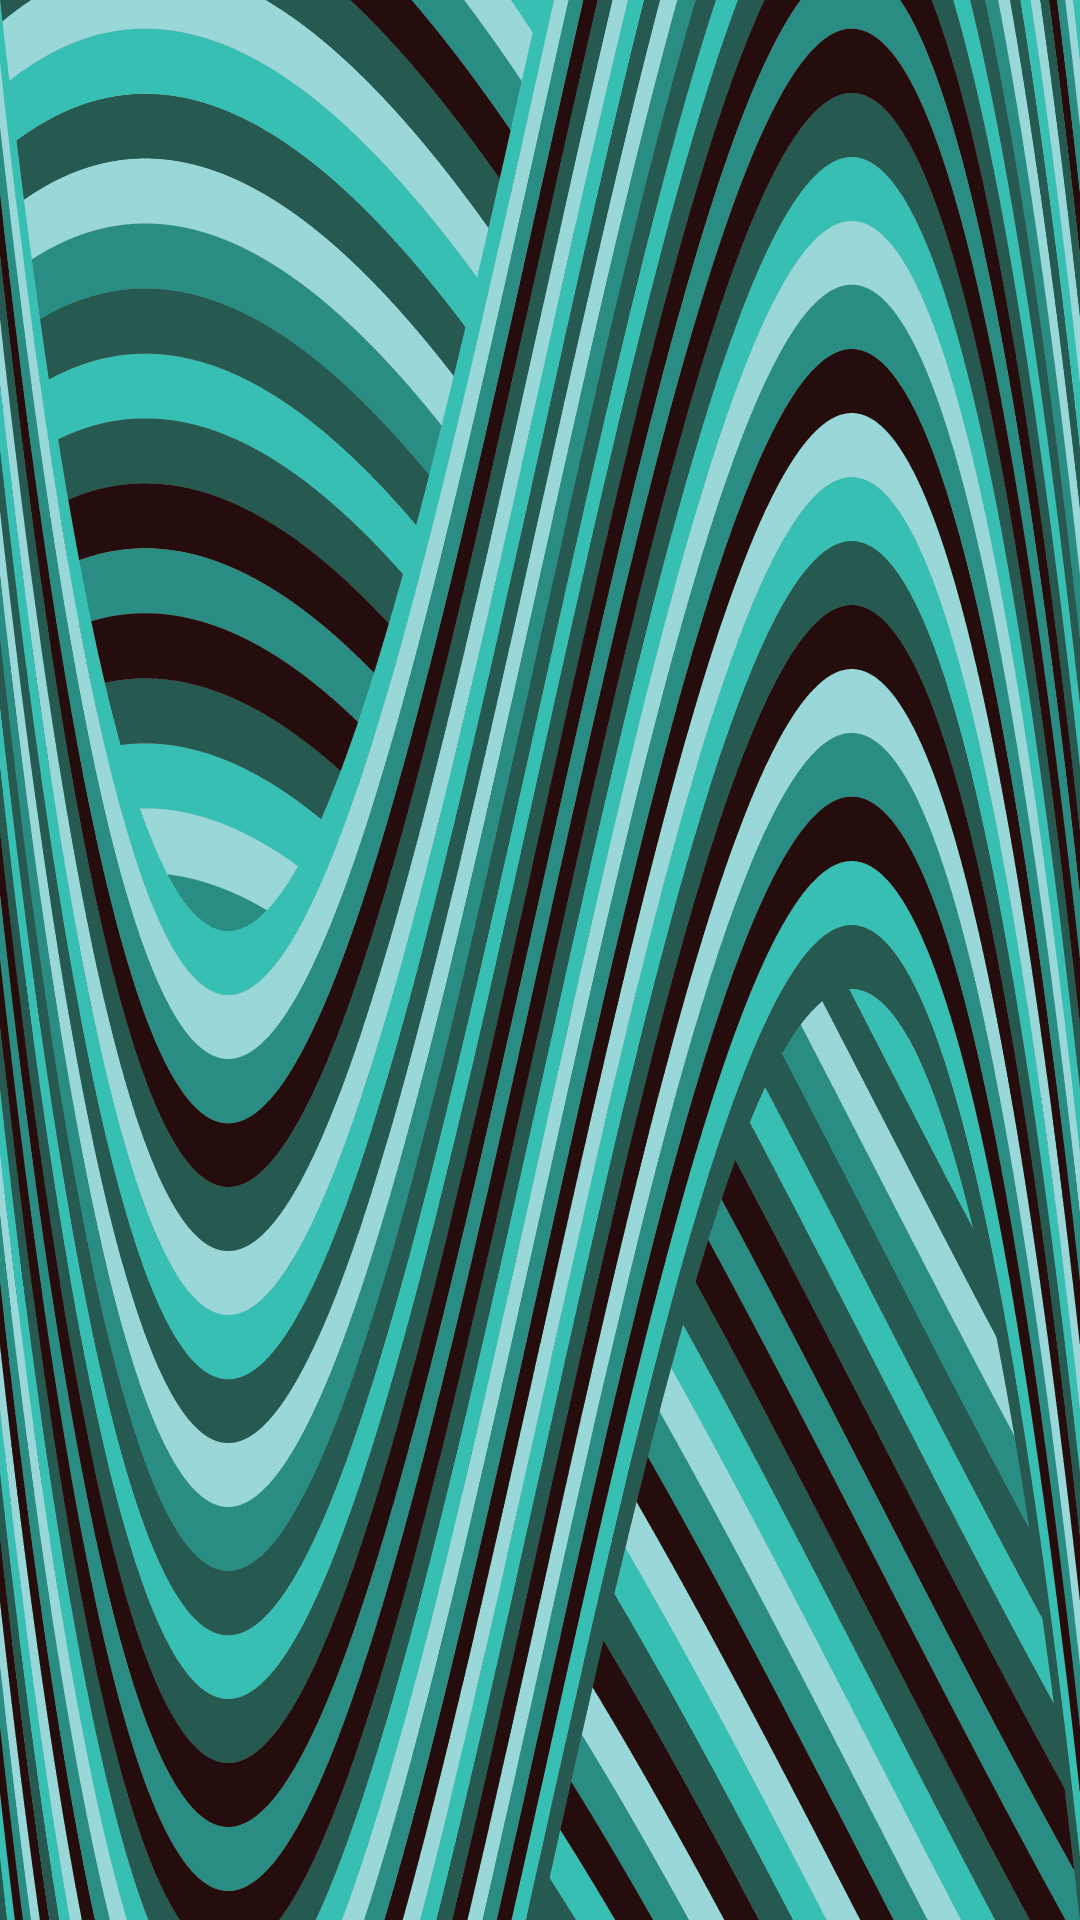 Abstract background with colorful wave patterns